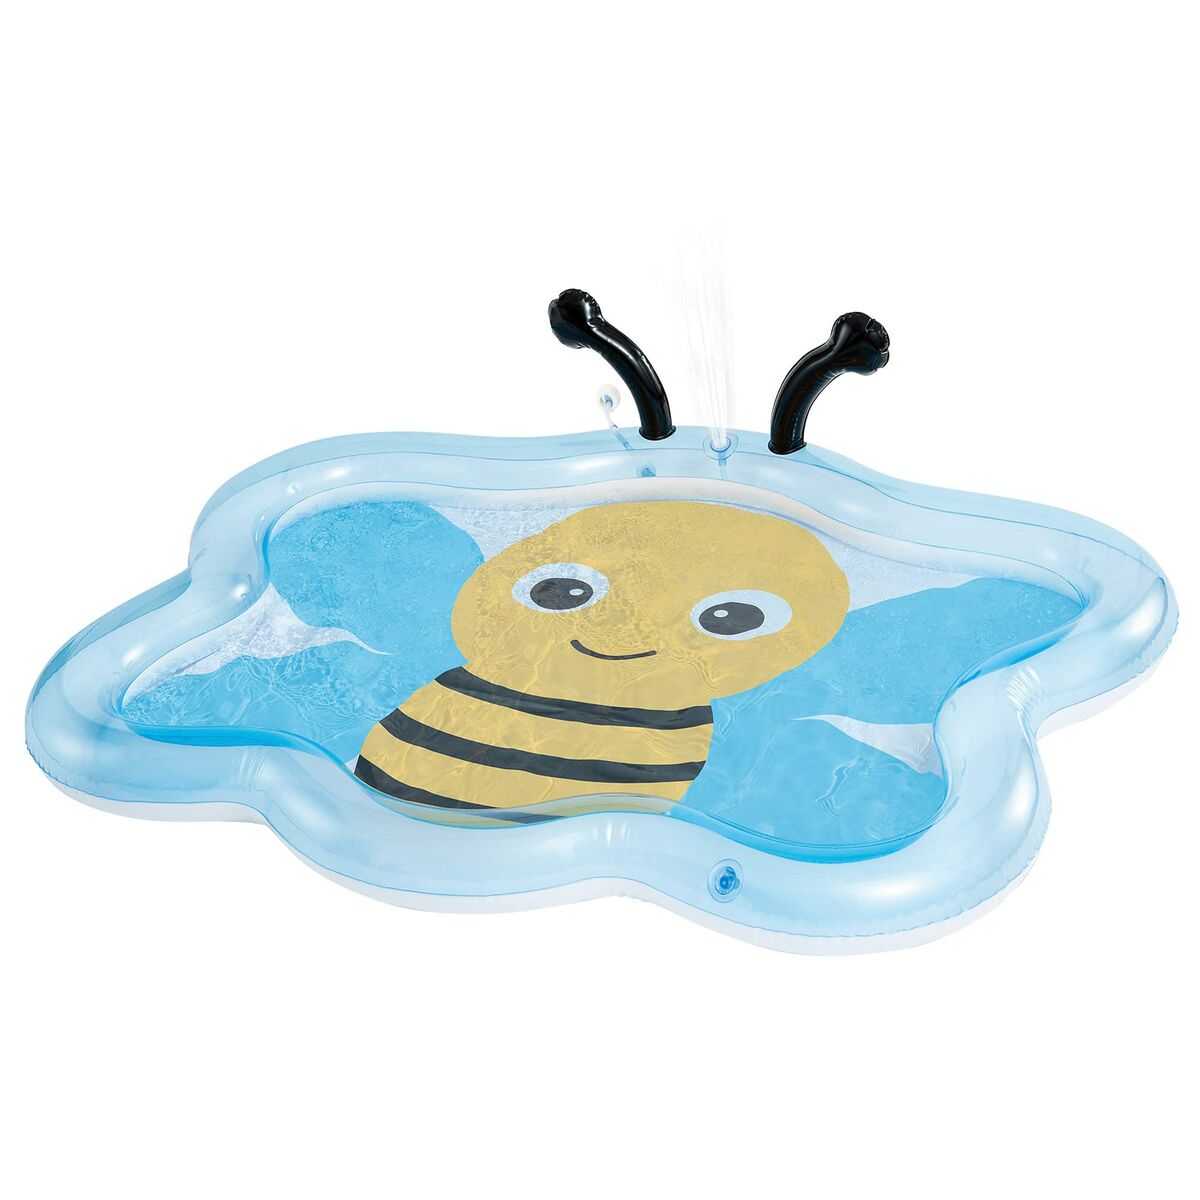 Inflatable Paddling Pool for Children Colorbaby Bee 127 x 102 x 28 cm Multicolour 59 L